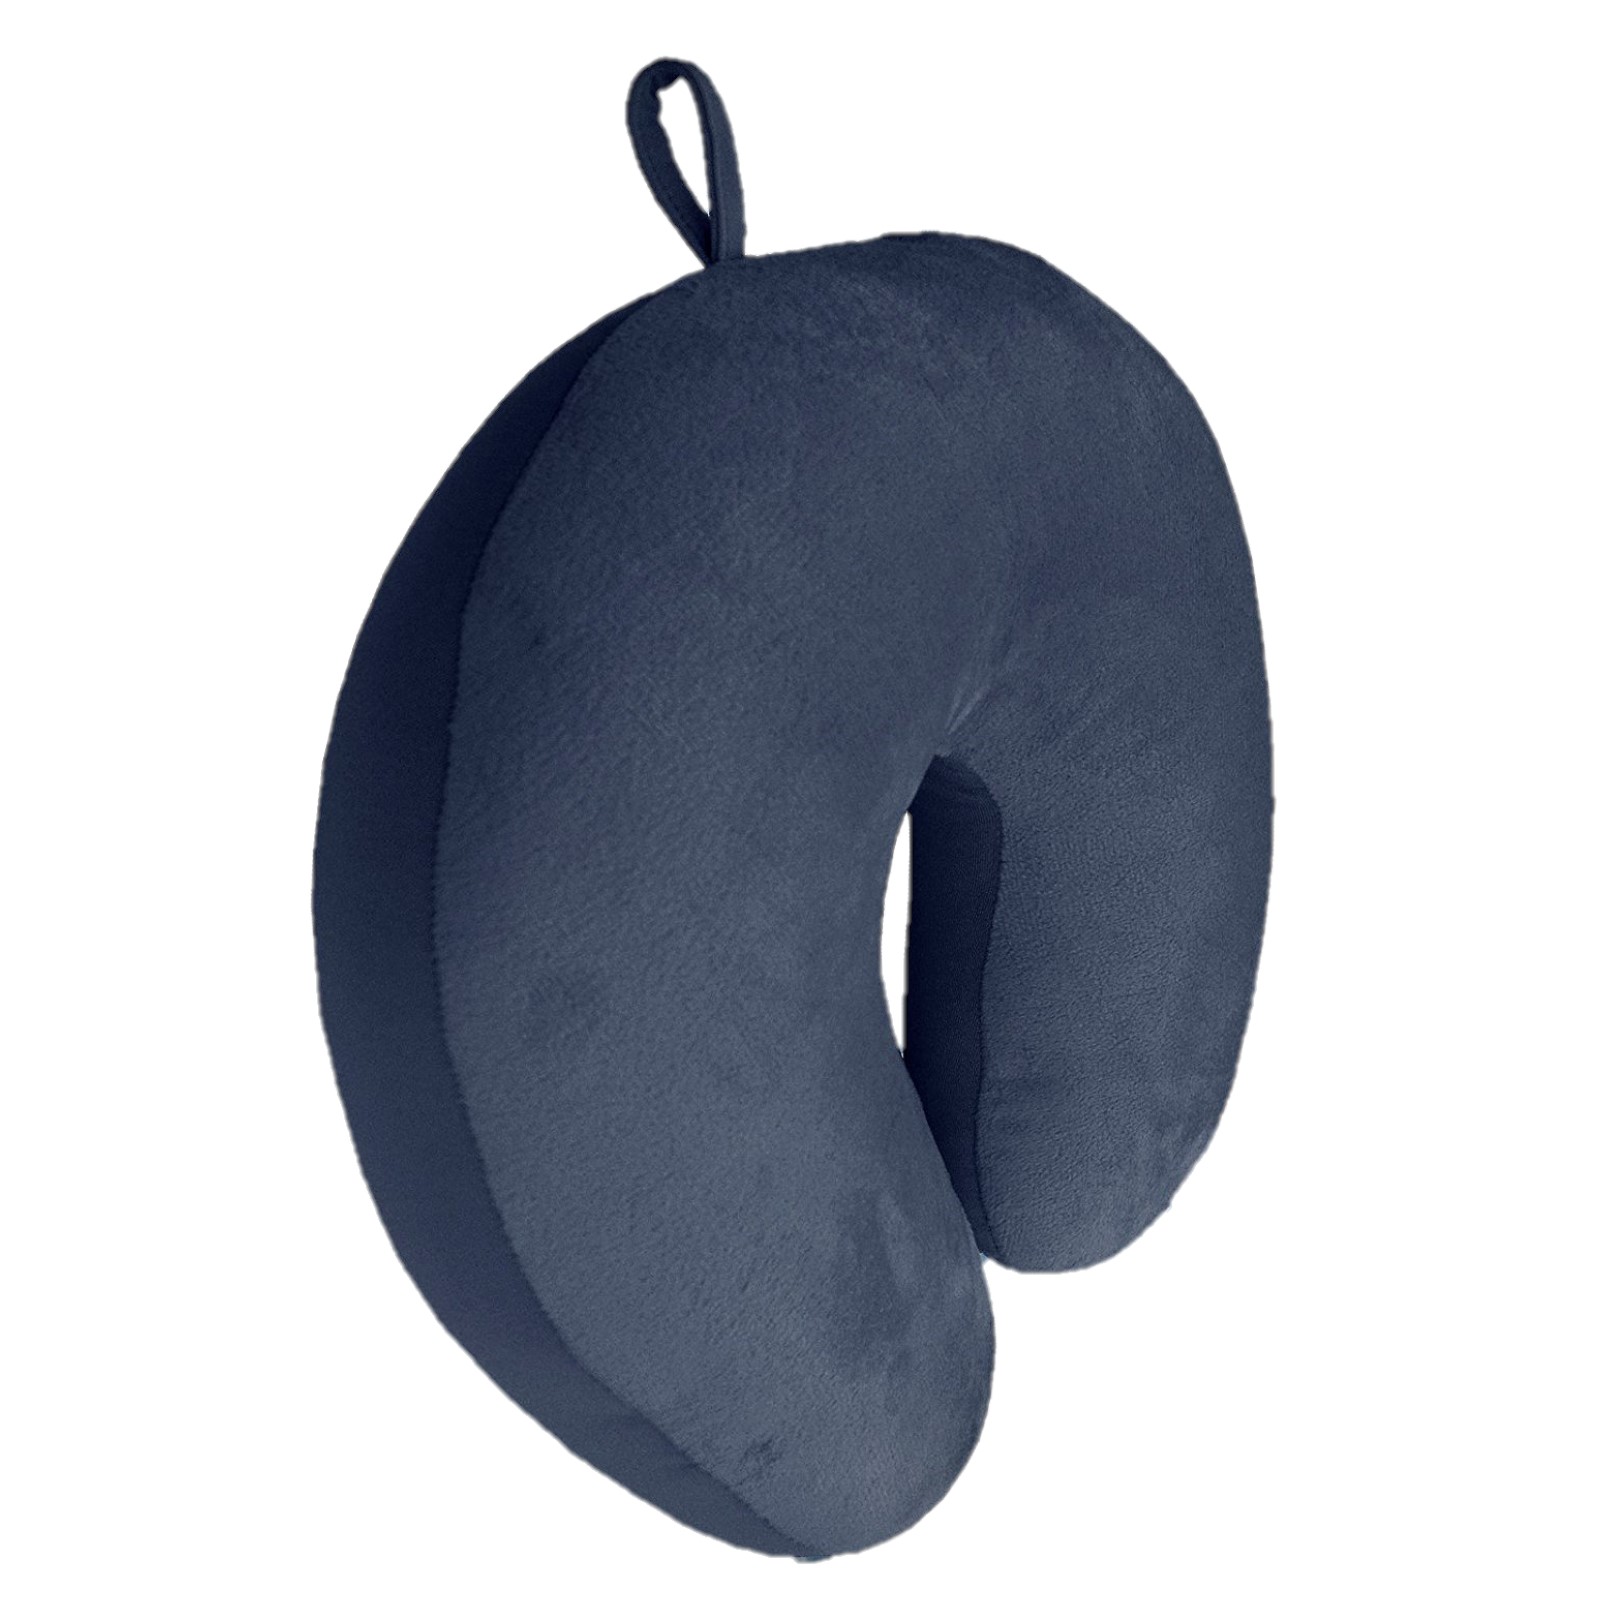 Bookishbunny Ultralight Micro Beads U Shaped Neck Pillow Travel Head Cervical Support Cushion Navy - image 2 of 5